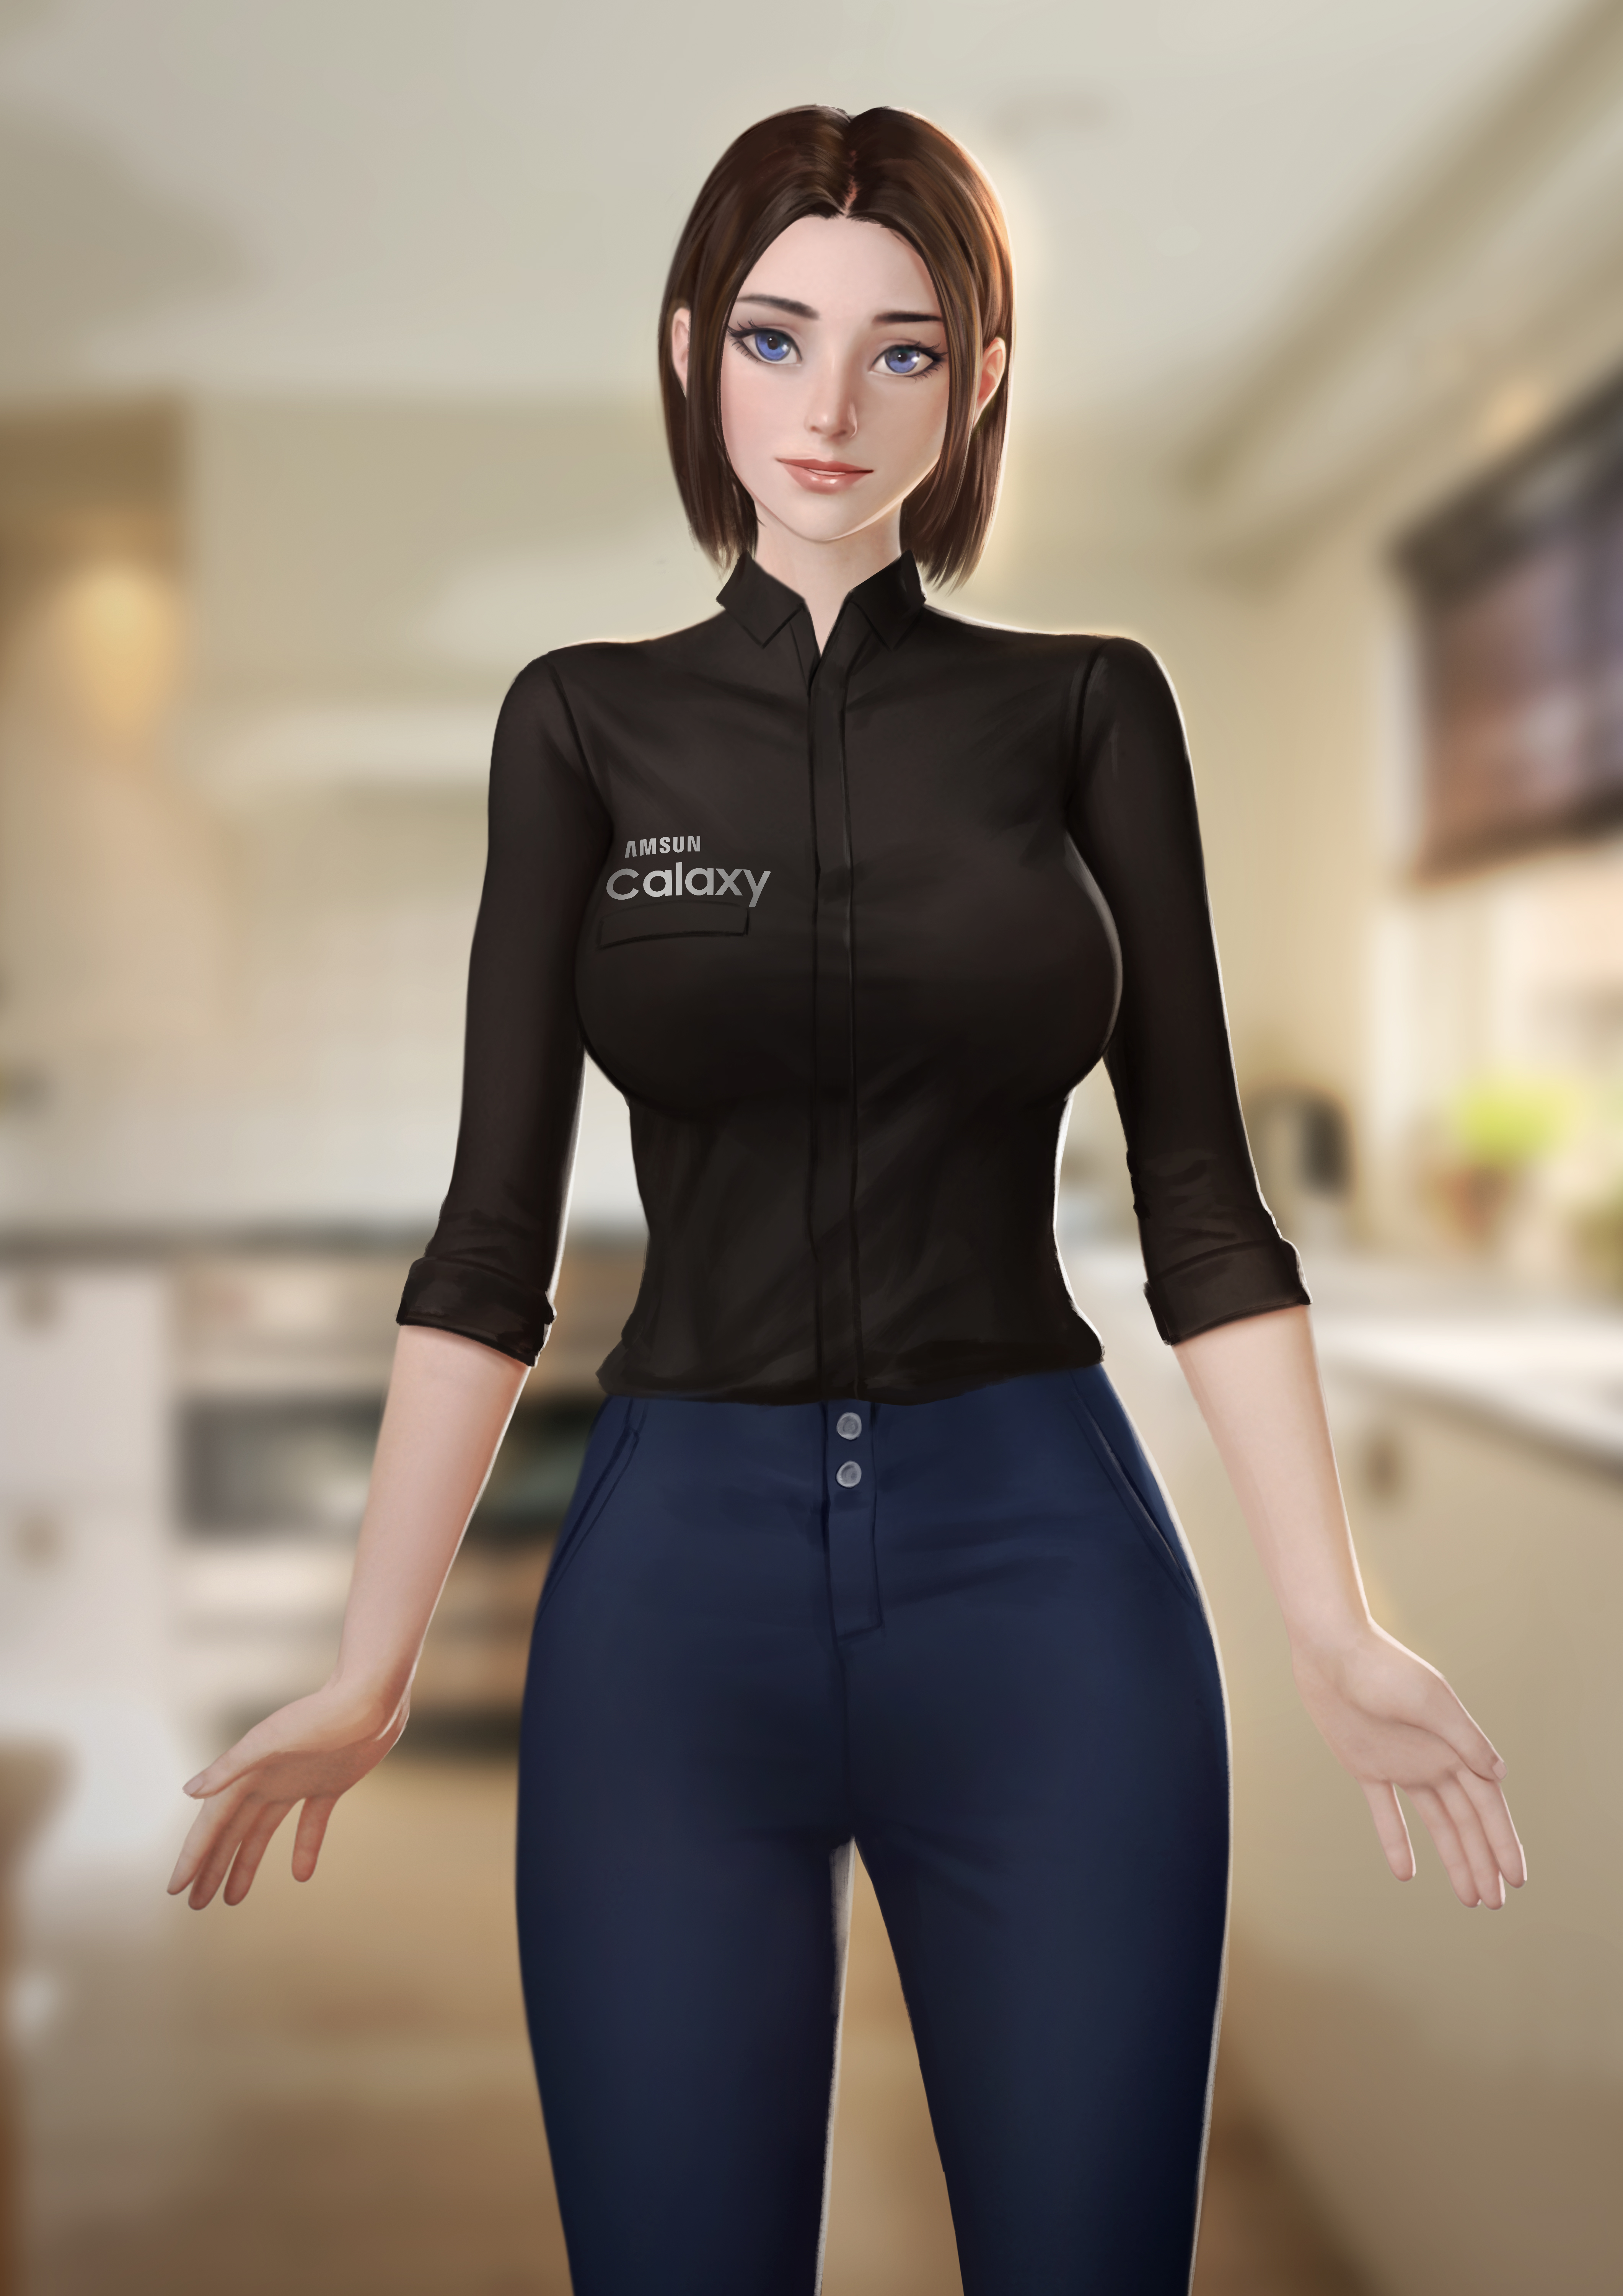 Sam Samsung Virtual Assistant Samsung Galaxy Fictional Character Brunette Blue Eyes Looking At Viewe 4242x6000